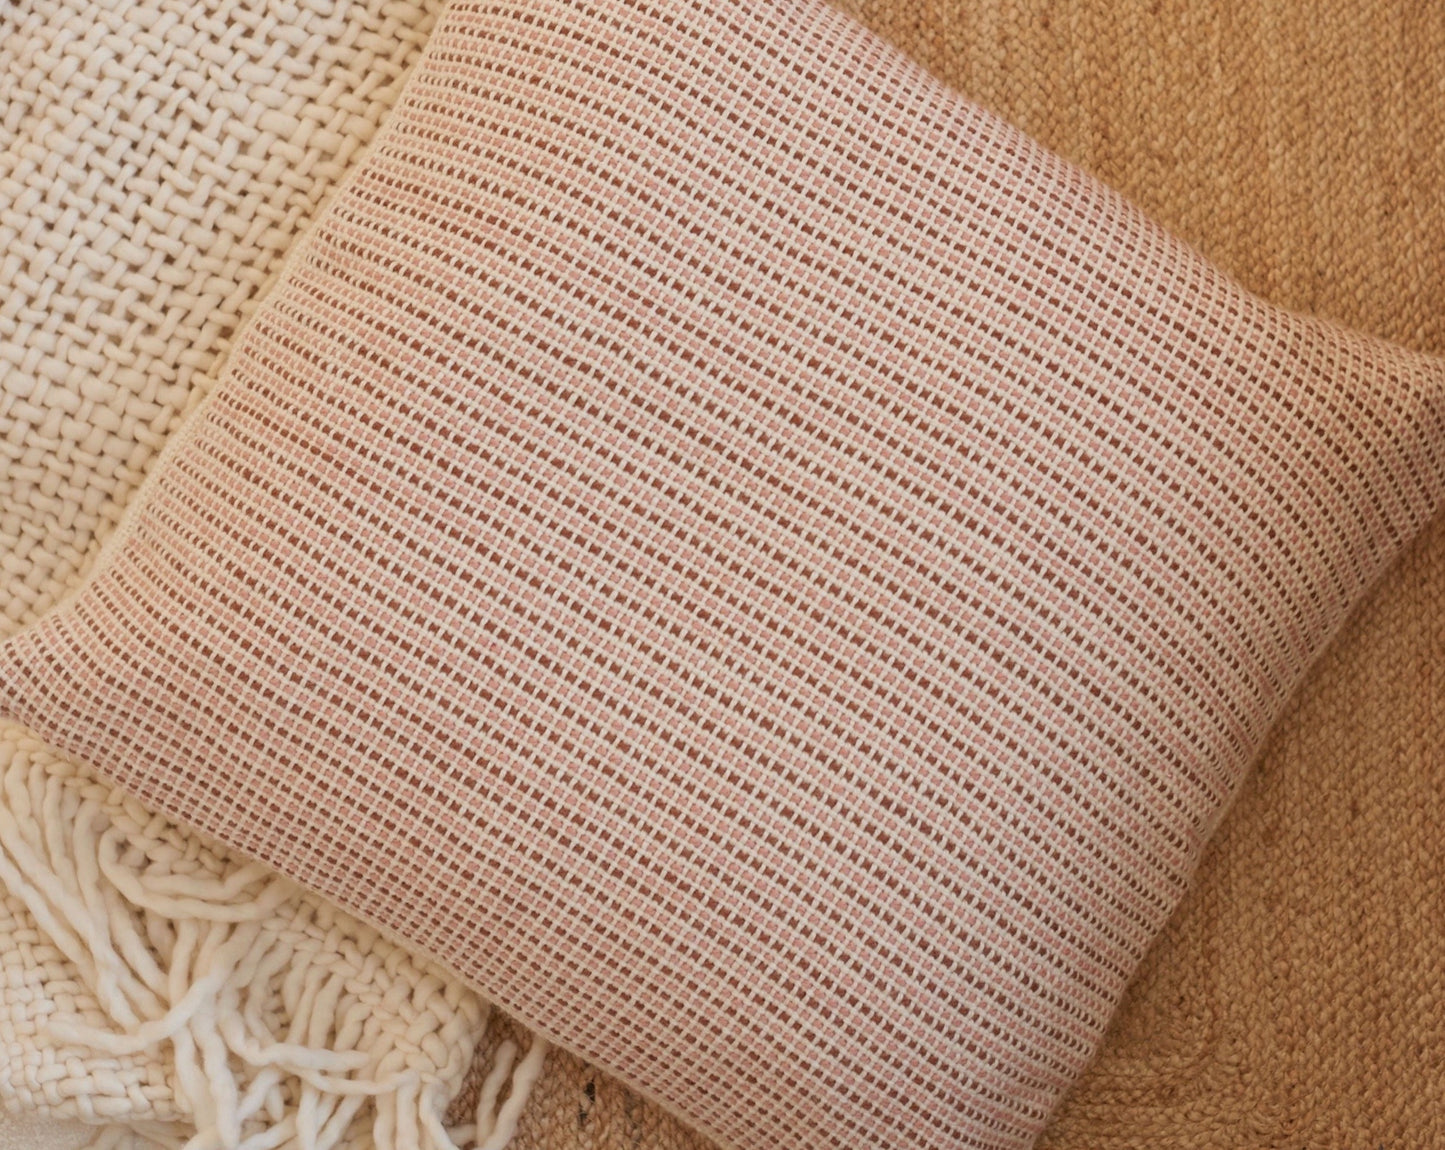 Textured Cover Cushion on a blanket and rug